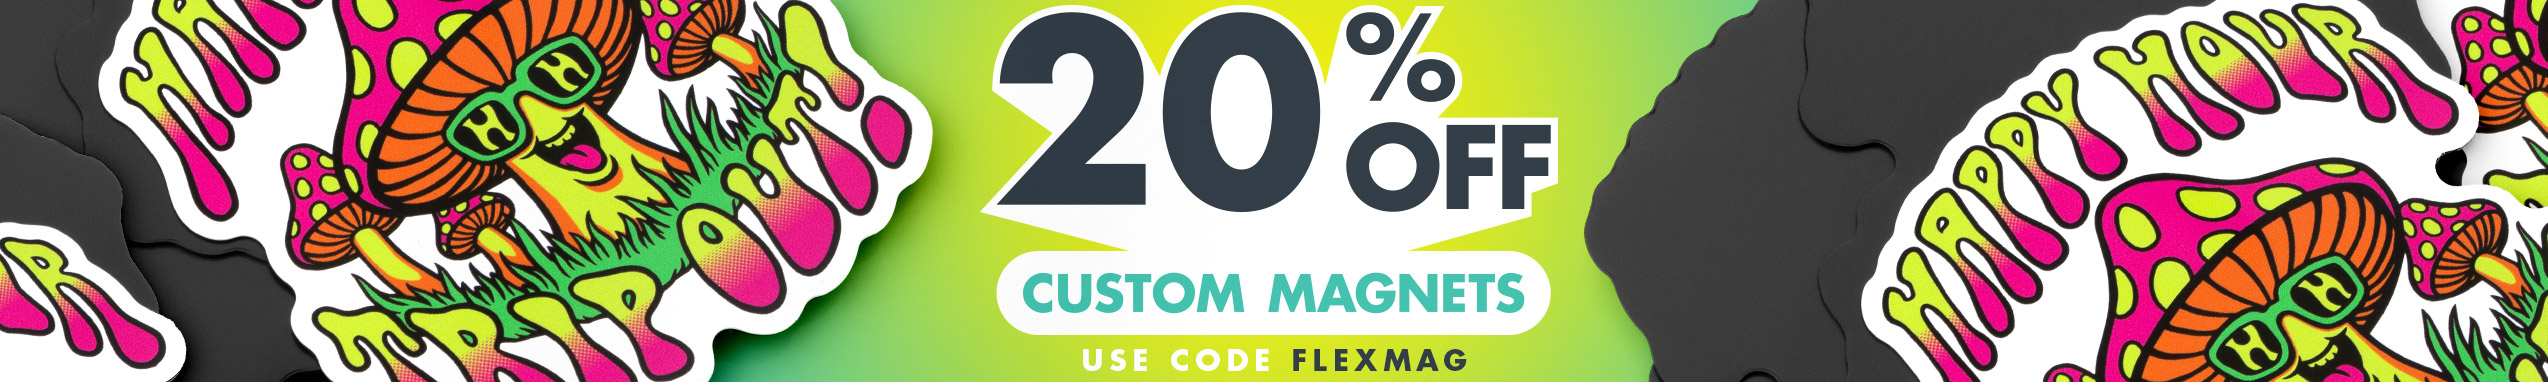 20% Off Flexible Custom Magnets with code FLEXMAG